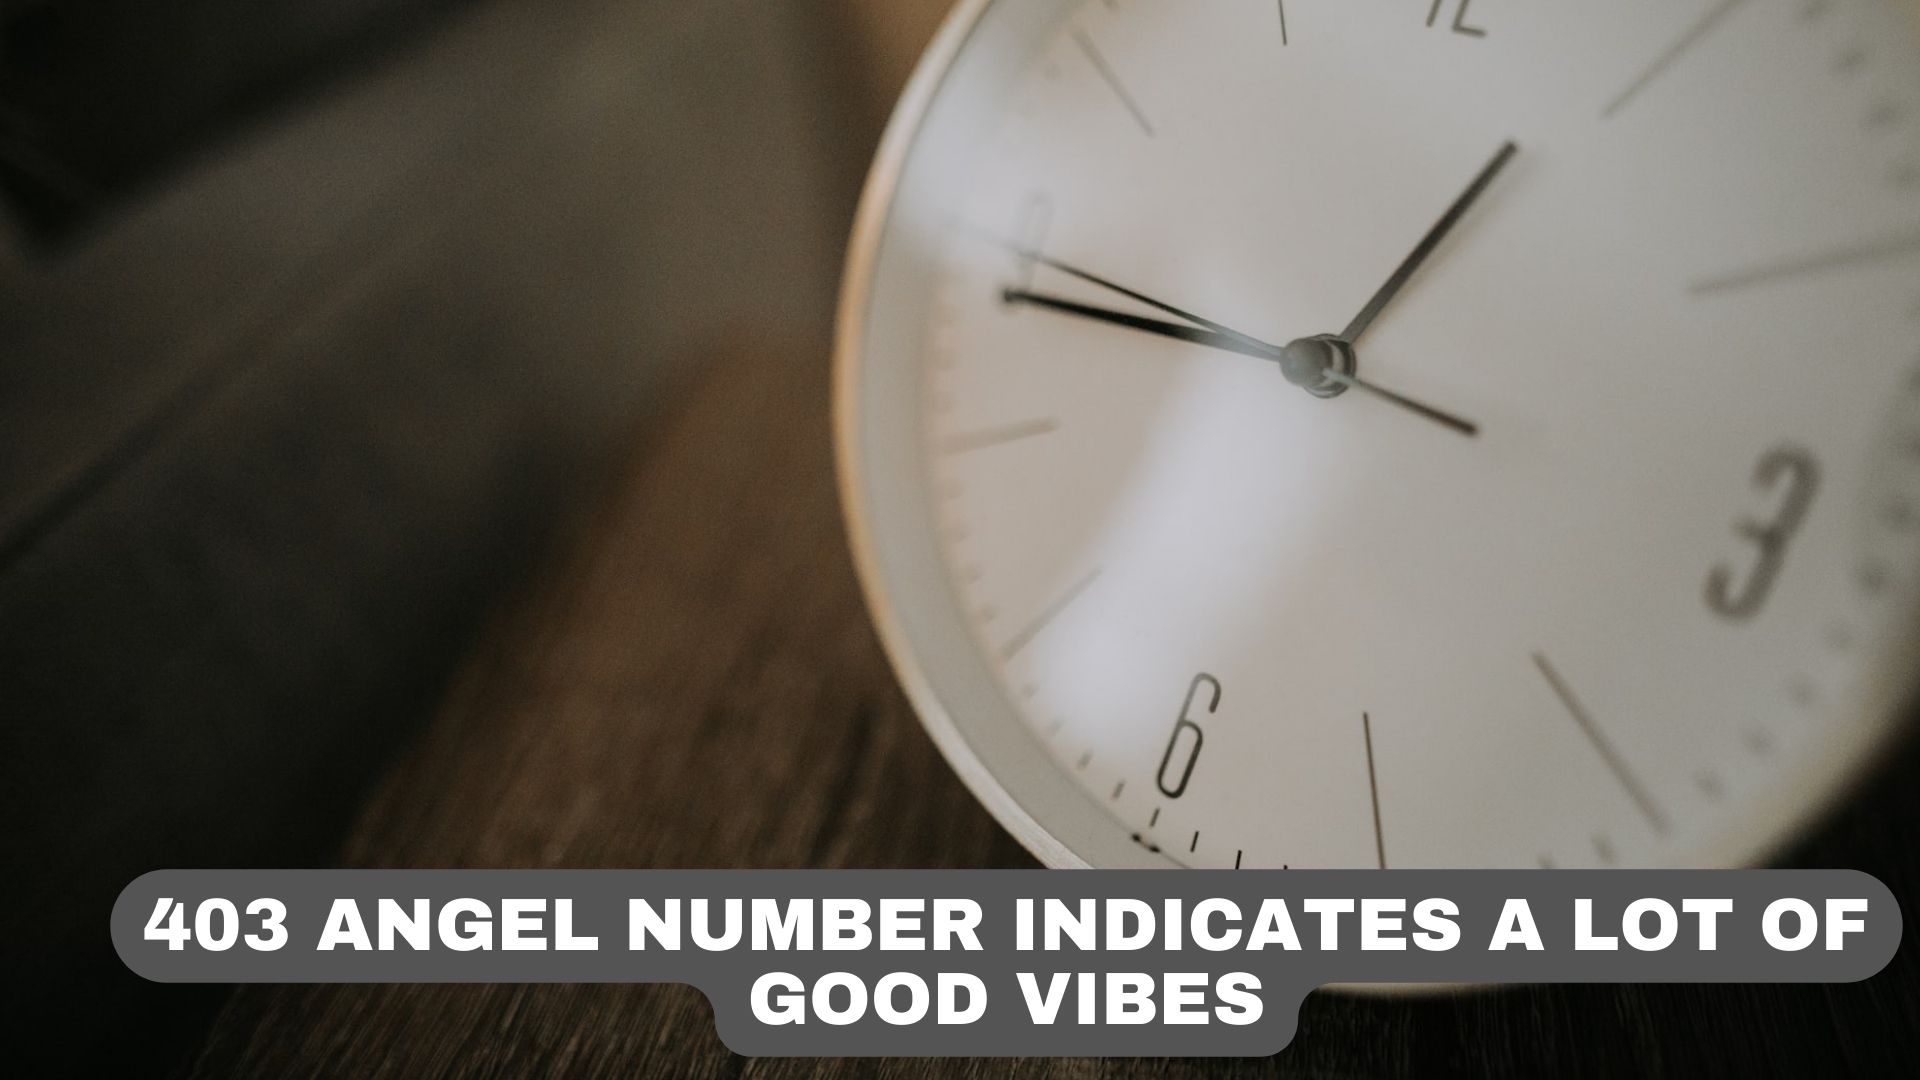 403 Angel Number Indicates A Lot Of Good Vibes